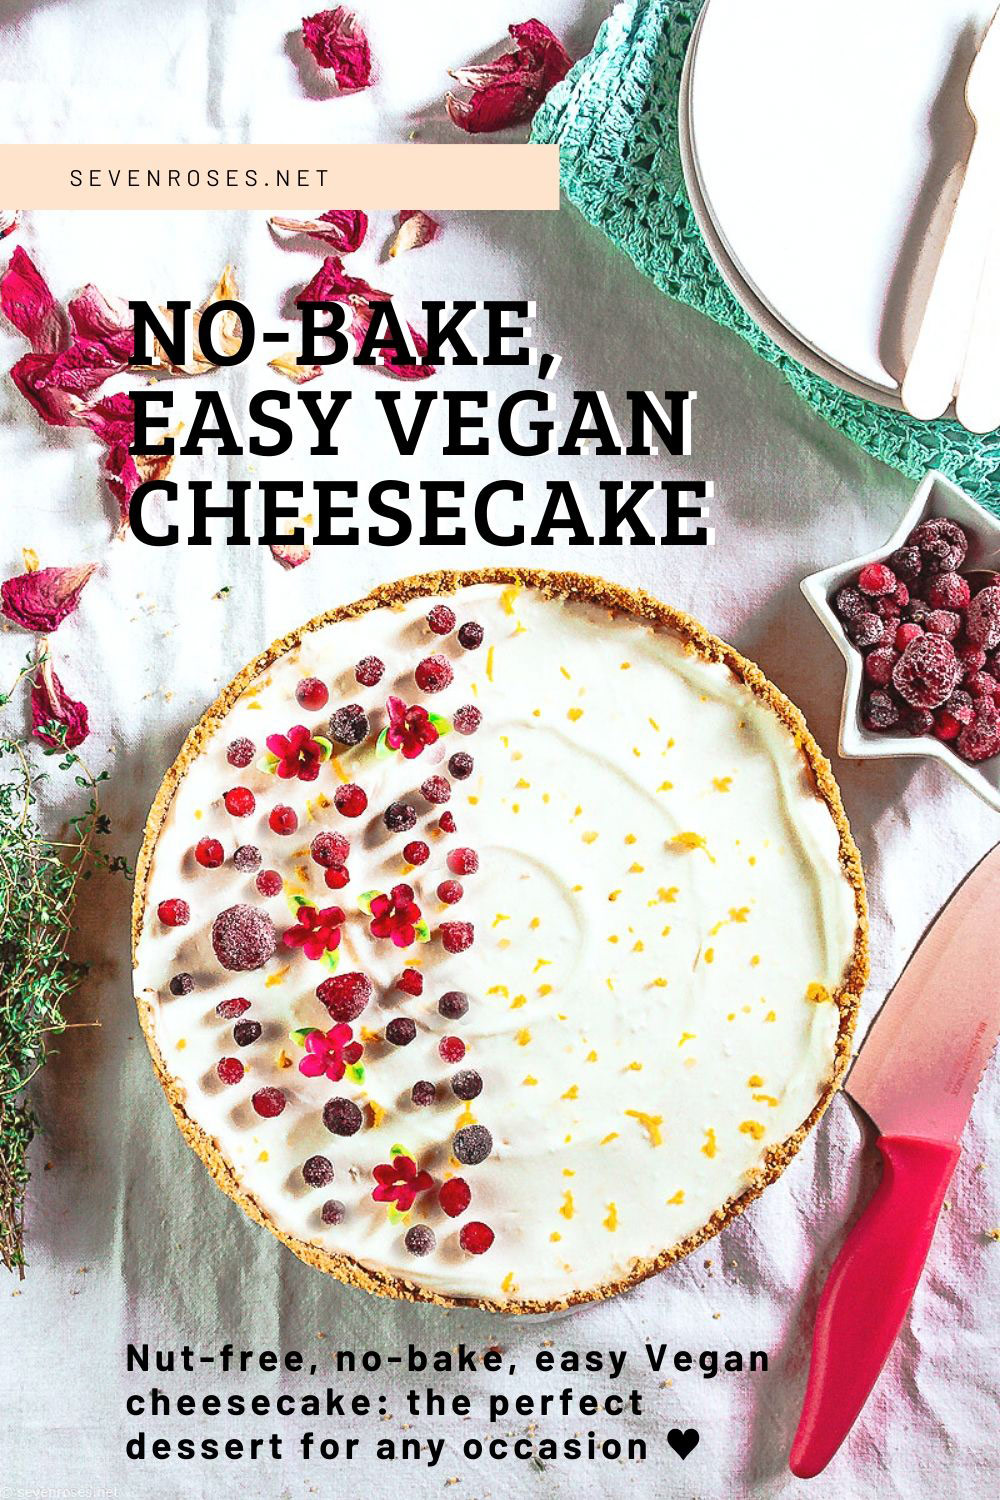 The beauty of of this no-bake, easy Vegan cheesecake recipe is that it will bring you right back to fond memories. And it doesn't require soaking expensive nuts, nor crazy amounts of sugar. This easy nut-free Vegan cheesecake stars a zesty topping, and you can team it with extra berries for a pop of color.